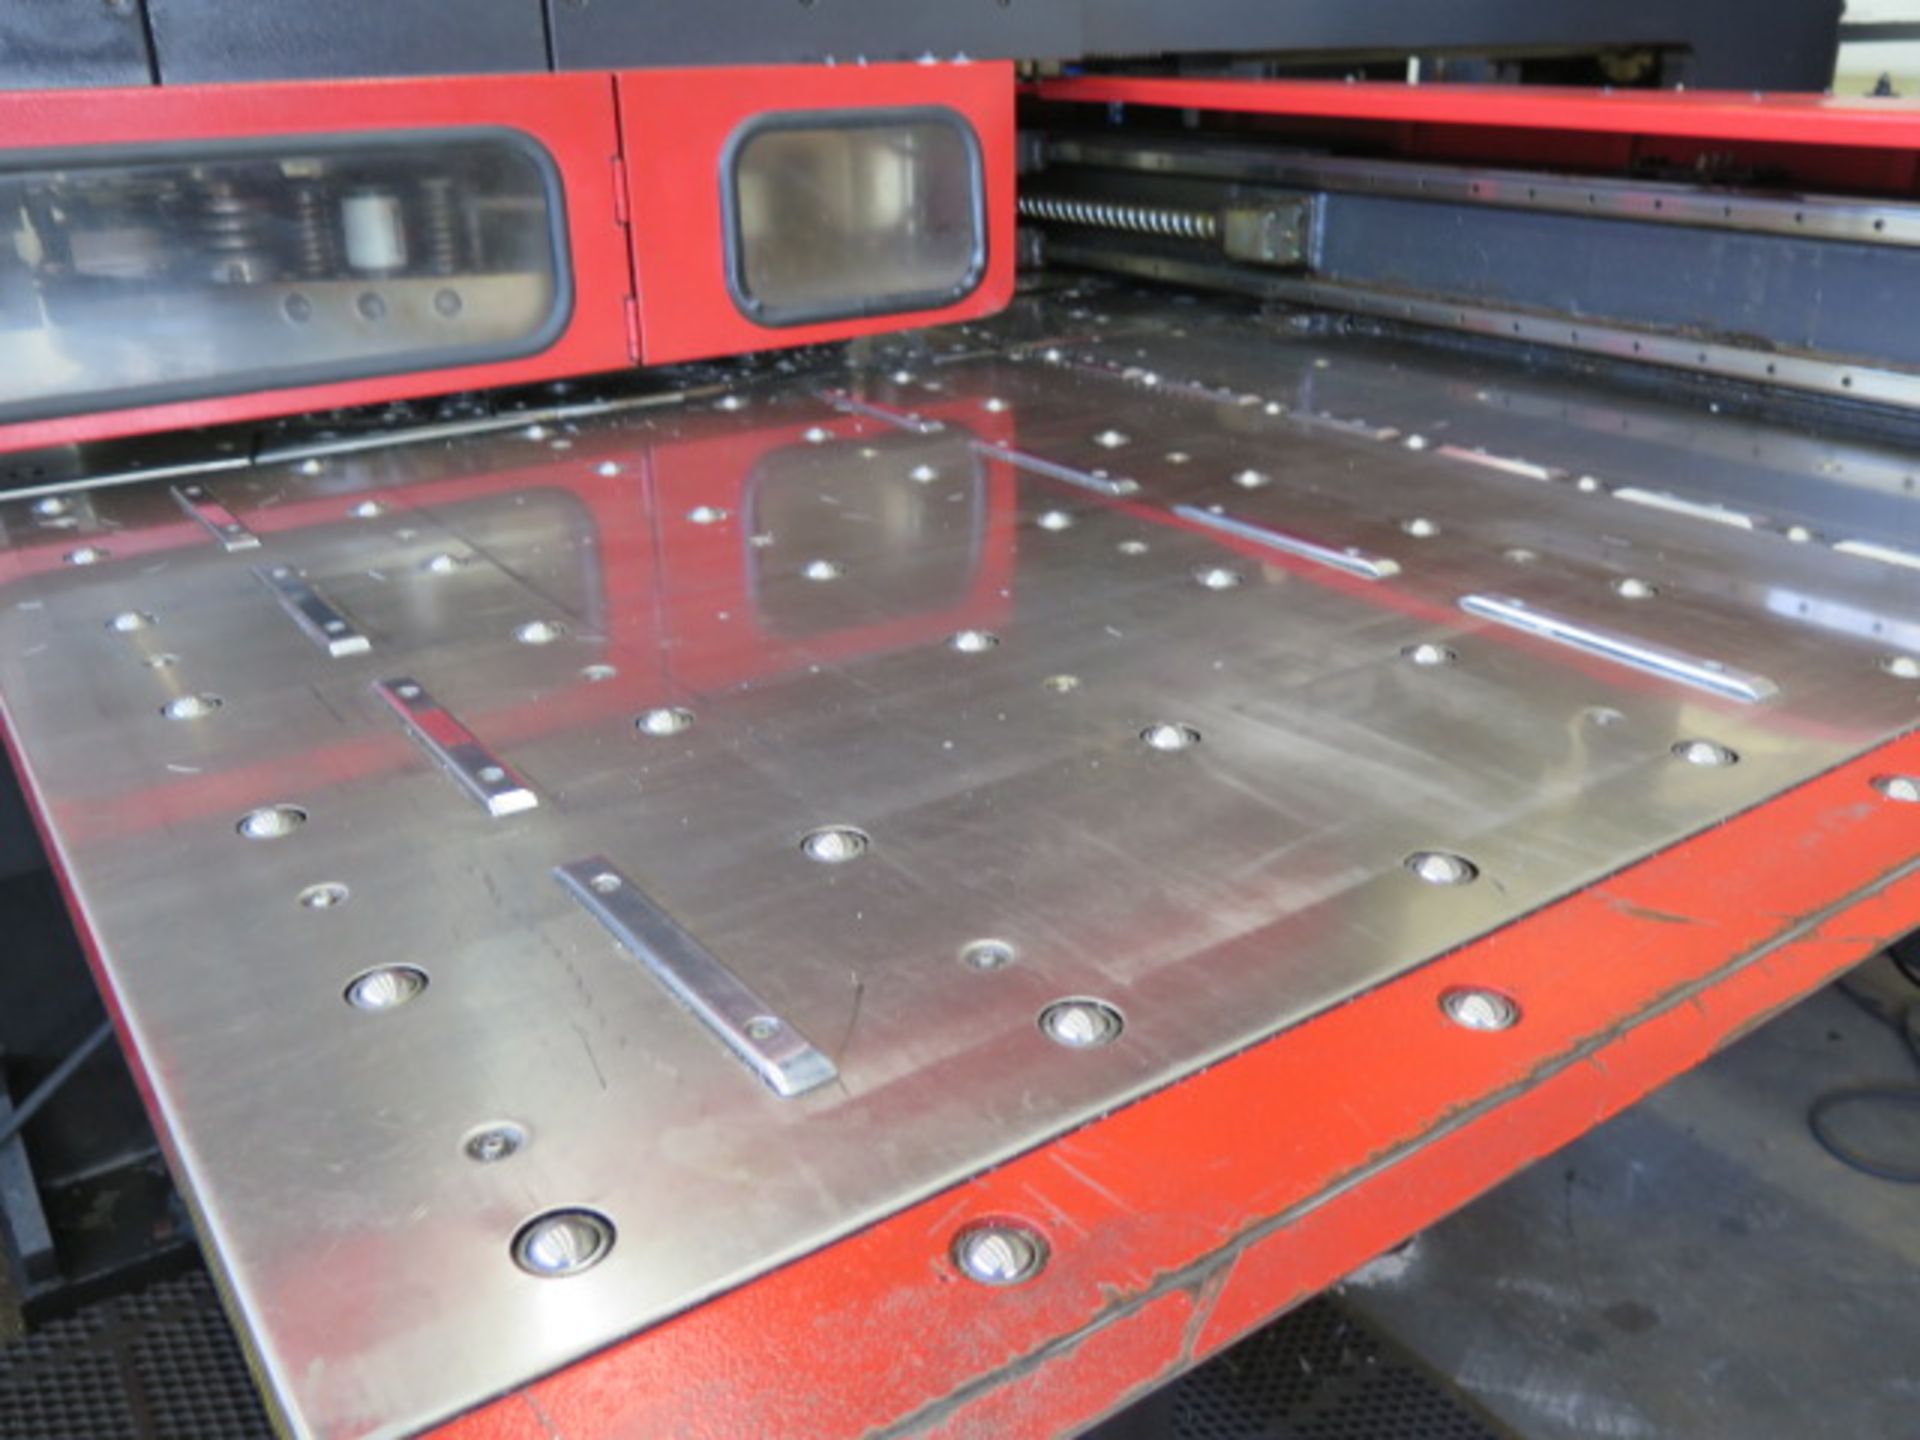 Amada VIPROS 357 30-Ton CNC Turret Punch Cell s/n 35710664 w/ 04P-C Controls, 58-Station, SOLD AS IS - Image 4 of 37